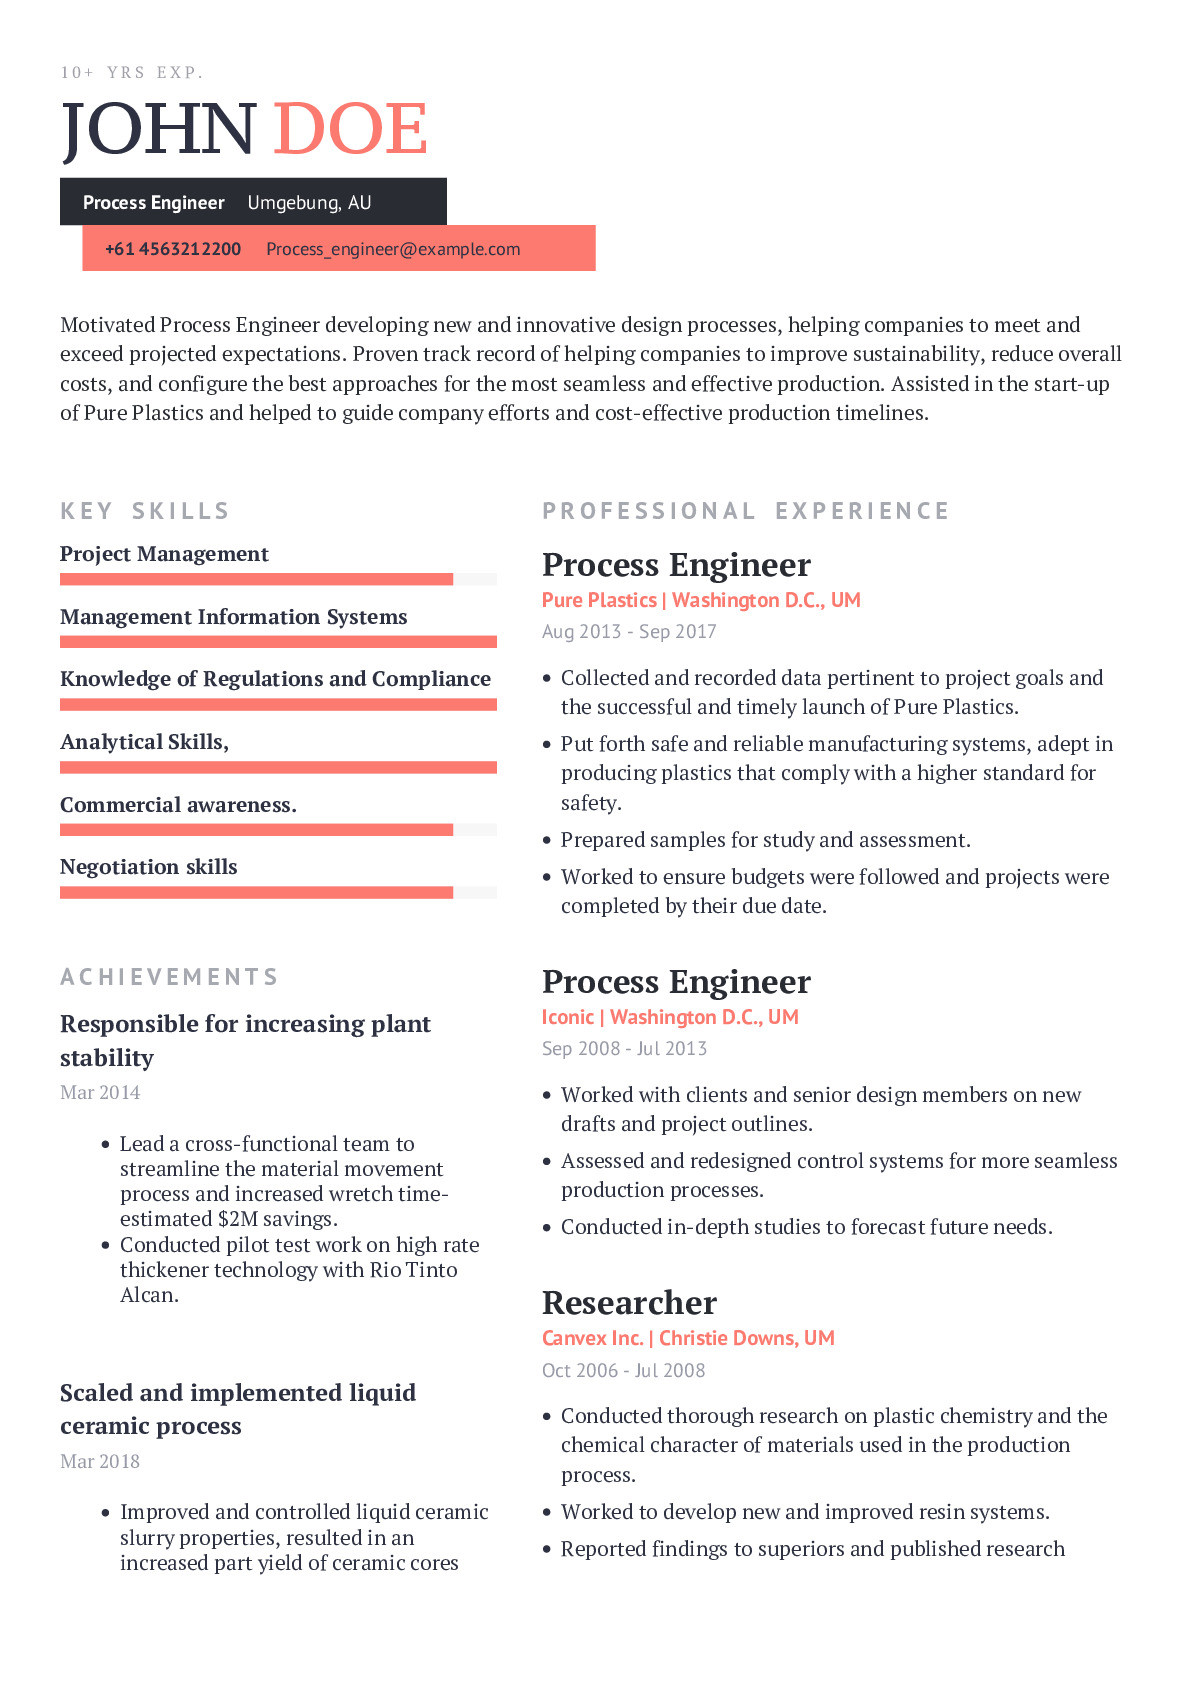 Lean Six Sigma Green Belt Resume Samples Process Engineer Resume Example with Content Sample Craftmycv